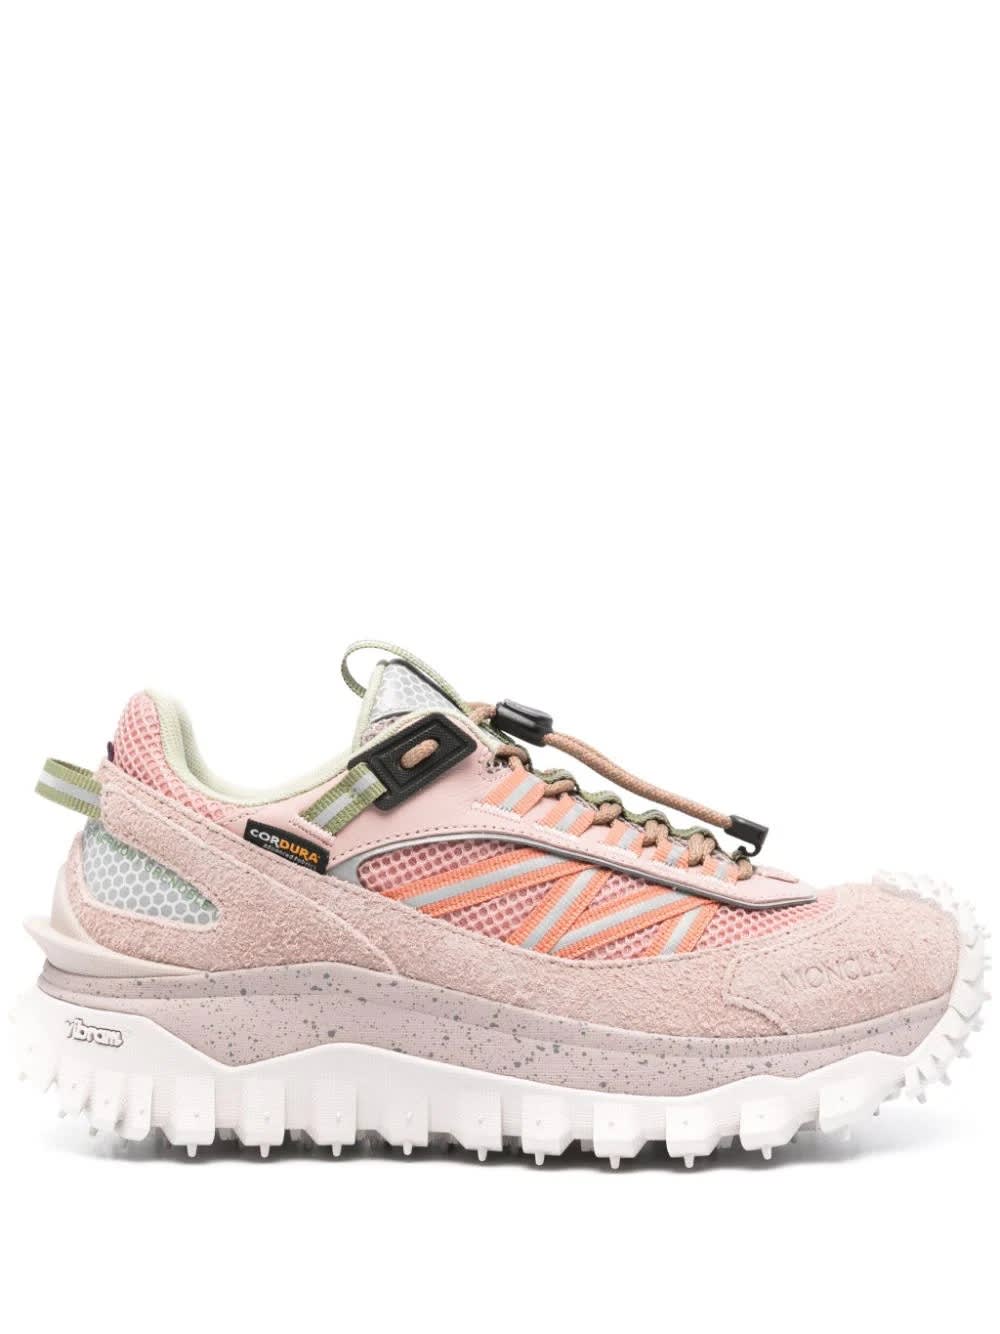 Moncler Pink Trailgrip Lite2 Trainers